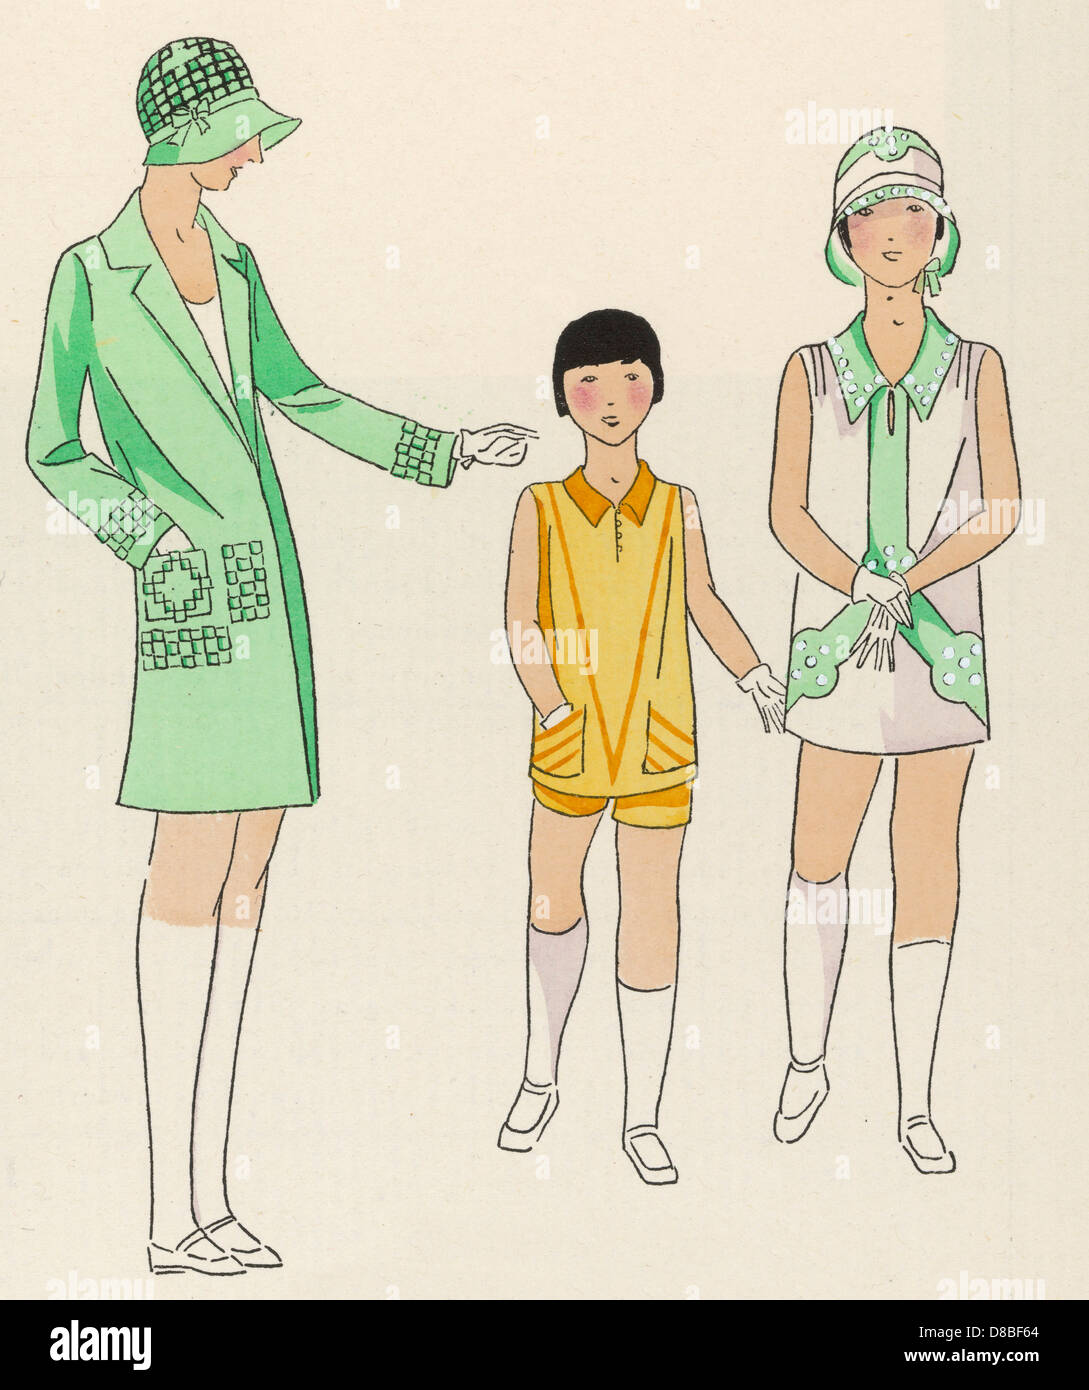 Three children in outfits by Mignapouf Stock Photo